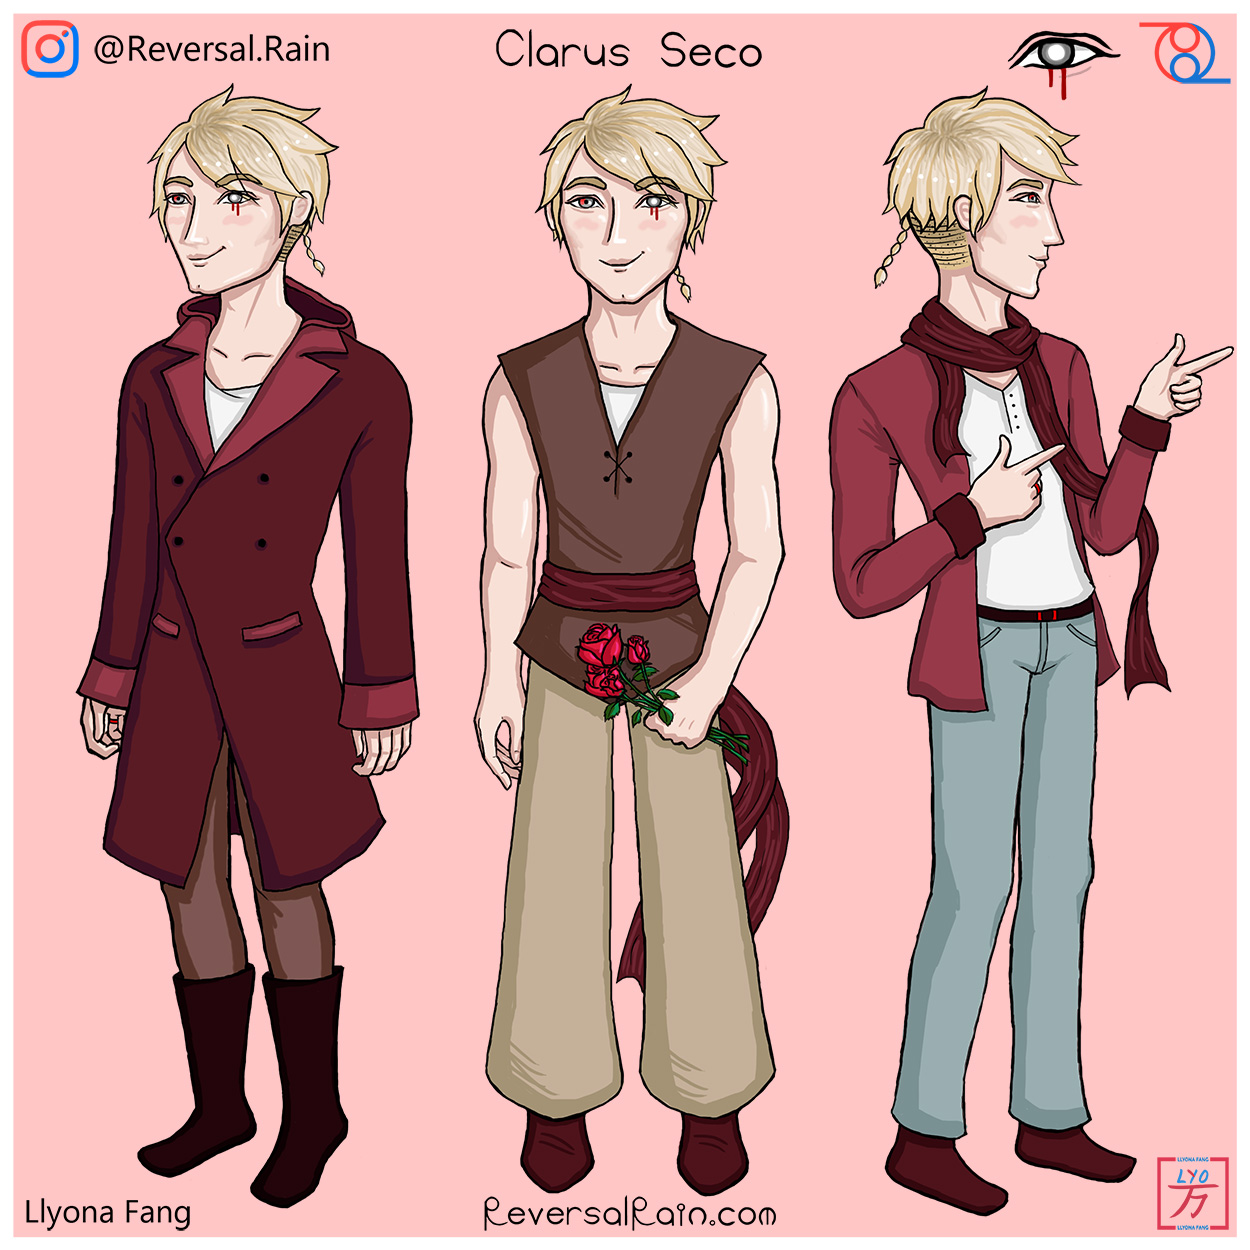 <p><h4>❤️🥀 Clarus Seco 🥀❤️</h4></p>
            <p>An athlete, daredevil, and musician!</p>
            <p>🎶 Instrument: Cello</p>
              <p>The son of the village chief is surprisingly laid back in spite of his father's expectations, taking a liking to breaking as
                many rules as possible. Despite this rebellious energy, he upholds a charismatic aura; you'll find yourself beguiled by his
                cunning eloquency. Regardless of his lack of depth perception, he is quite agile. You might catch him scaling the walls of the
                village clock tower, or leaping into the waters of the shadowed understory, catching a glimpse at the creatures below. Needless
                to say, the sunset curfew has been broken too many times. He often performs duets on stage with a skilled harpist. The rich dark
                tone of his cello glides over the night, seeming to awaken the whispers of souls that passed long ago.<p><p>
                <p>» <i>Click to exit description!</i> «</p> </p>
              